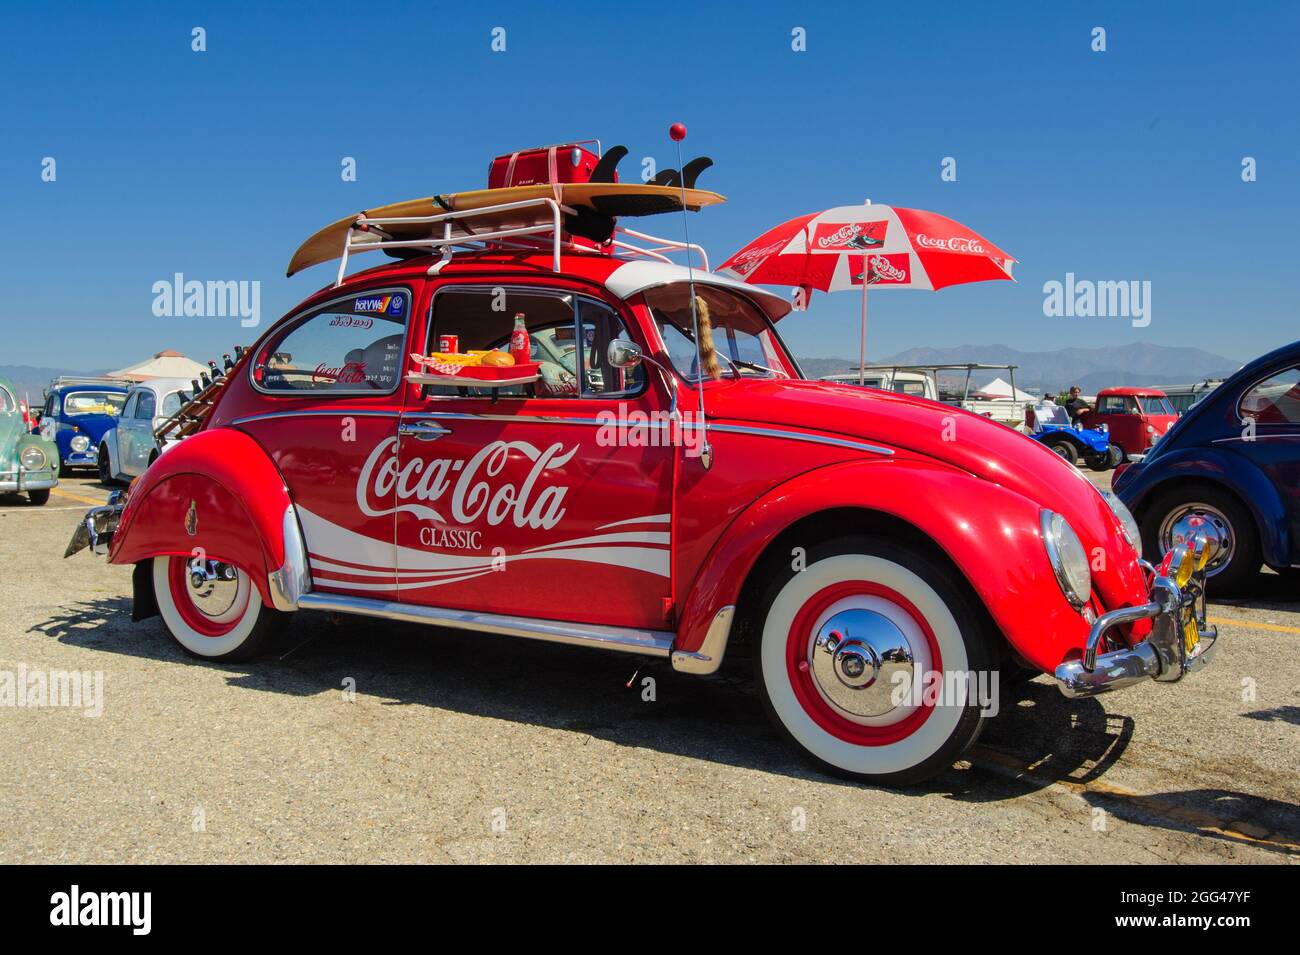 Pomona, USA - June 1, 2014: Red Coca-Cola Classic-branded VW Beetle at Pomona Classic Car Show and Sale near Los Angeles. Stock Photo